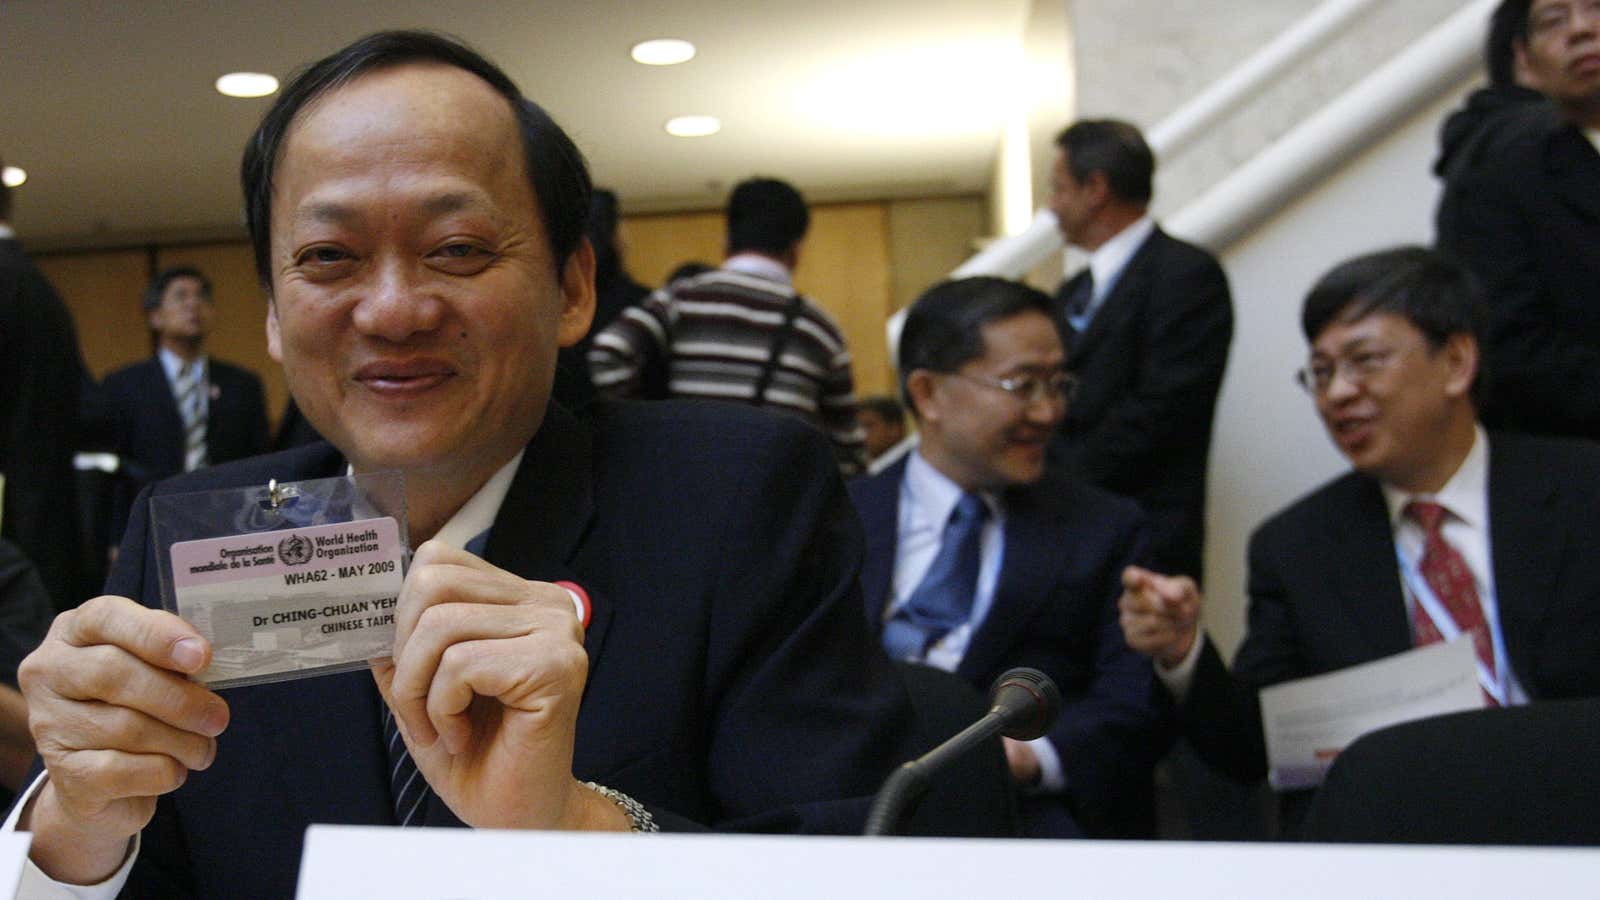 Taiwan’s former health minister, Yeh Ching-chuan, displays his observer badge at the opening of the 62nd World Health Assembly in 2009—the first time Taiwan was granted observer status by the WHO.